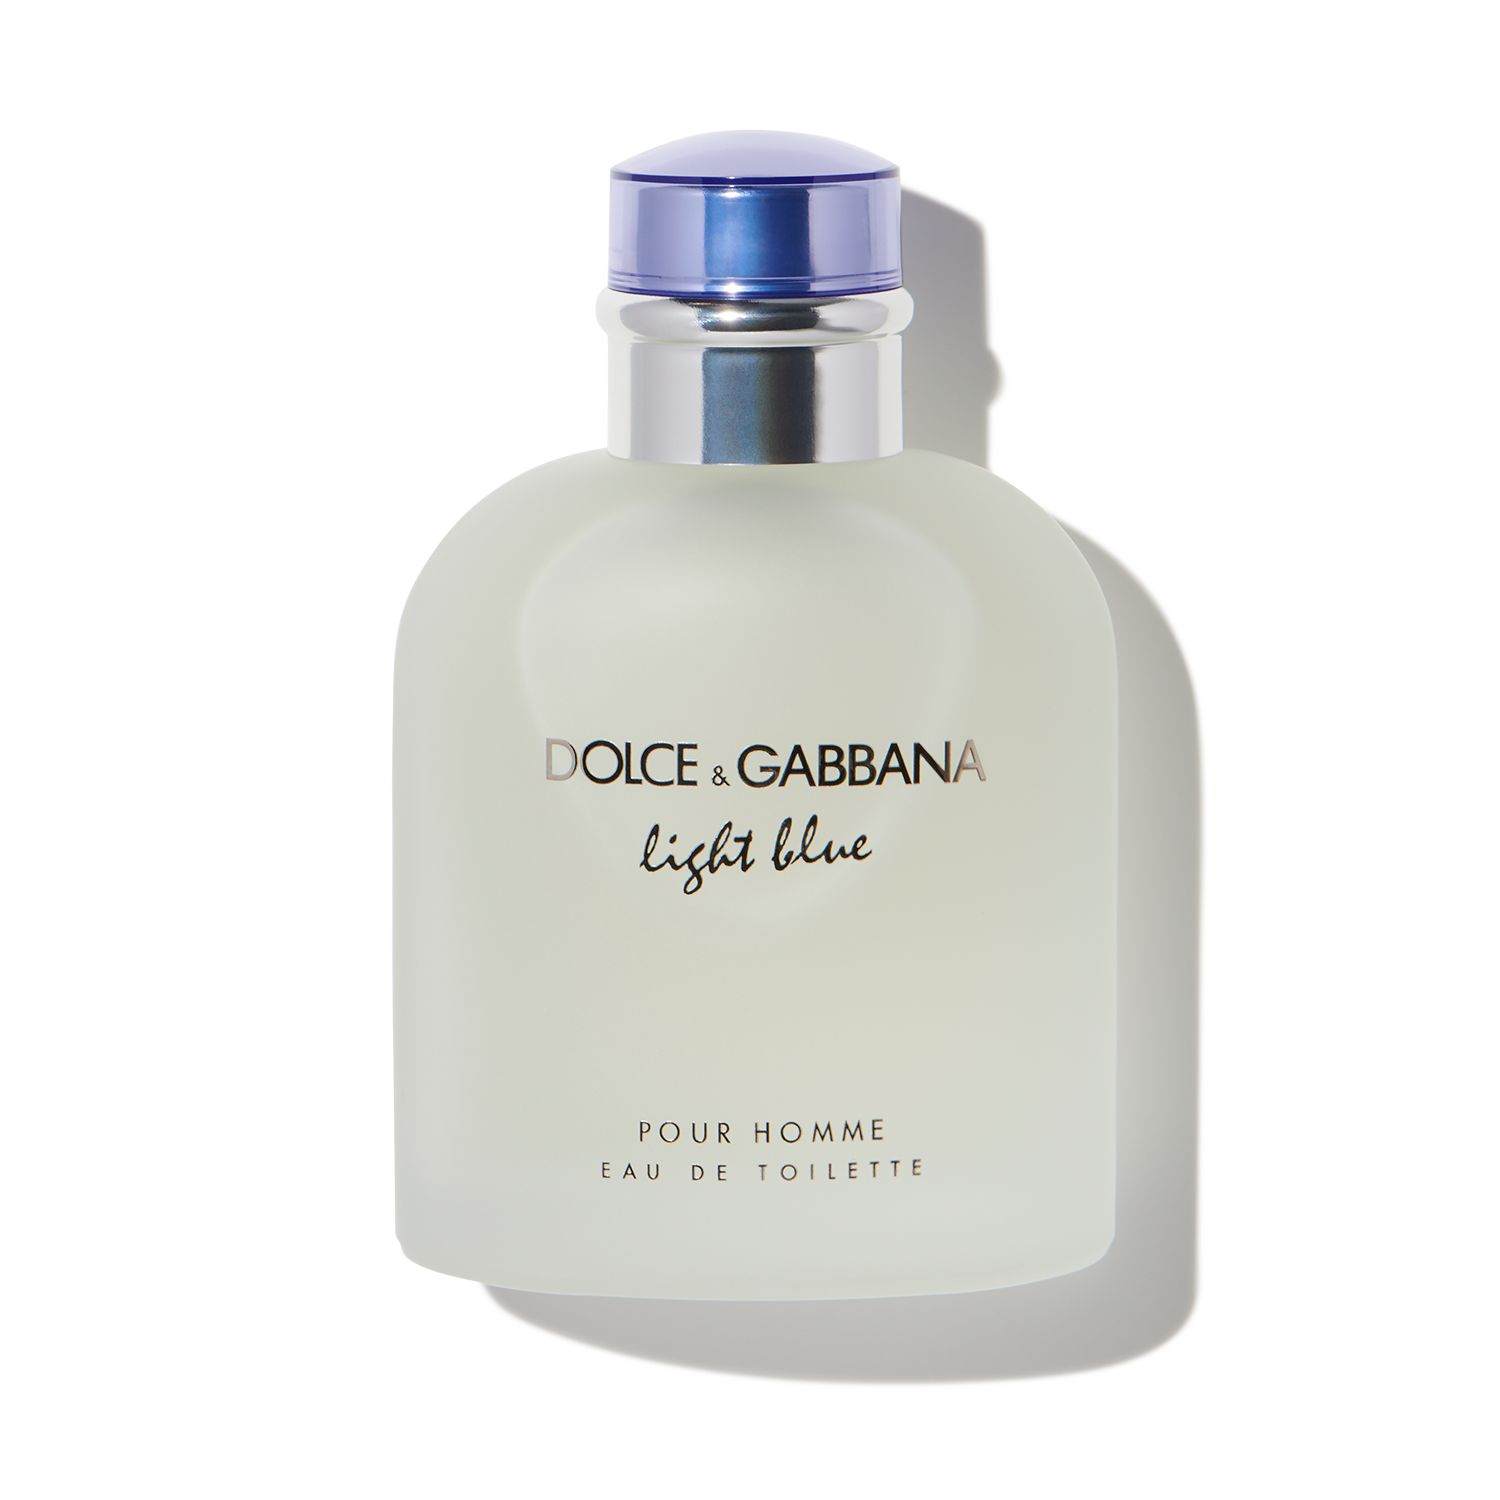 Sightseeing Fredag mammal Get Dolce and Gabbana cologne Light Blue at Scentbird